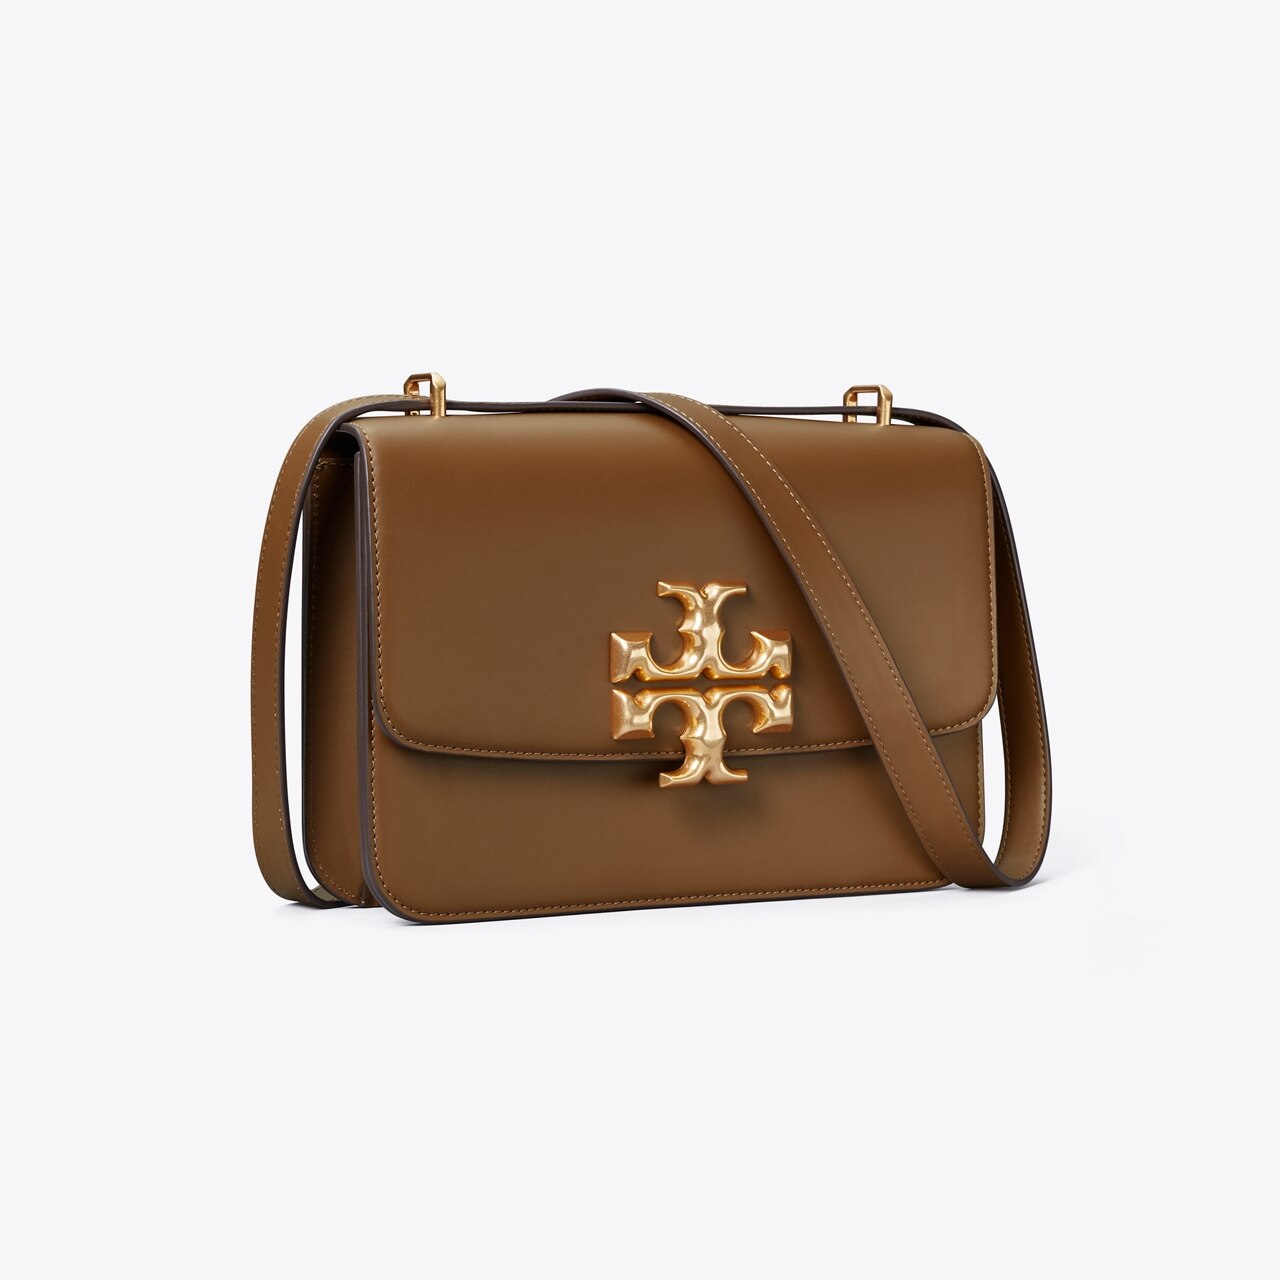 Buy Tory Burch Eleanor Shoulder Bag with Leather Strap, Brown Color Women